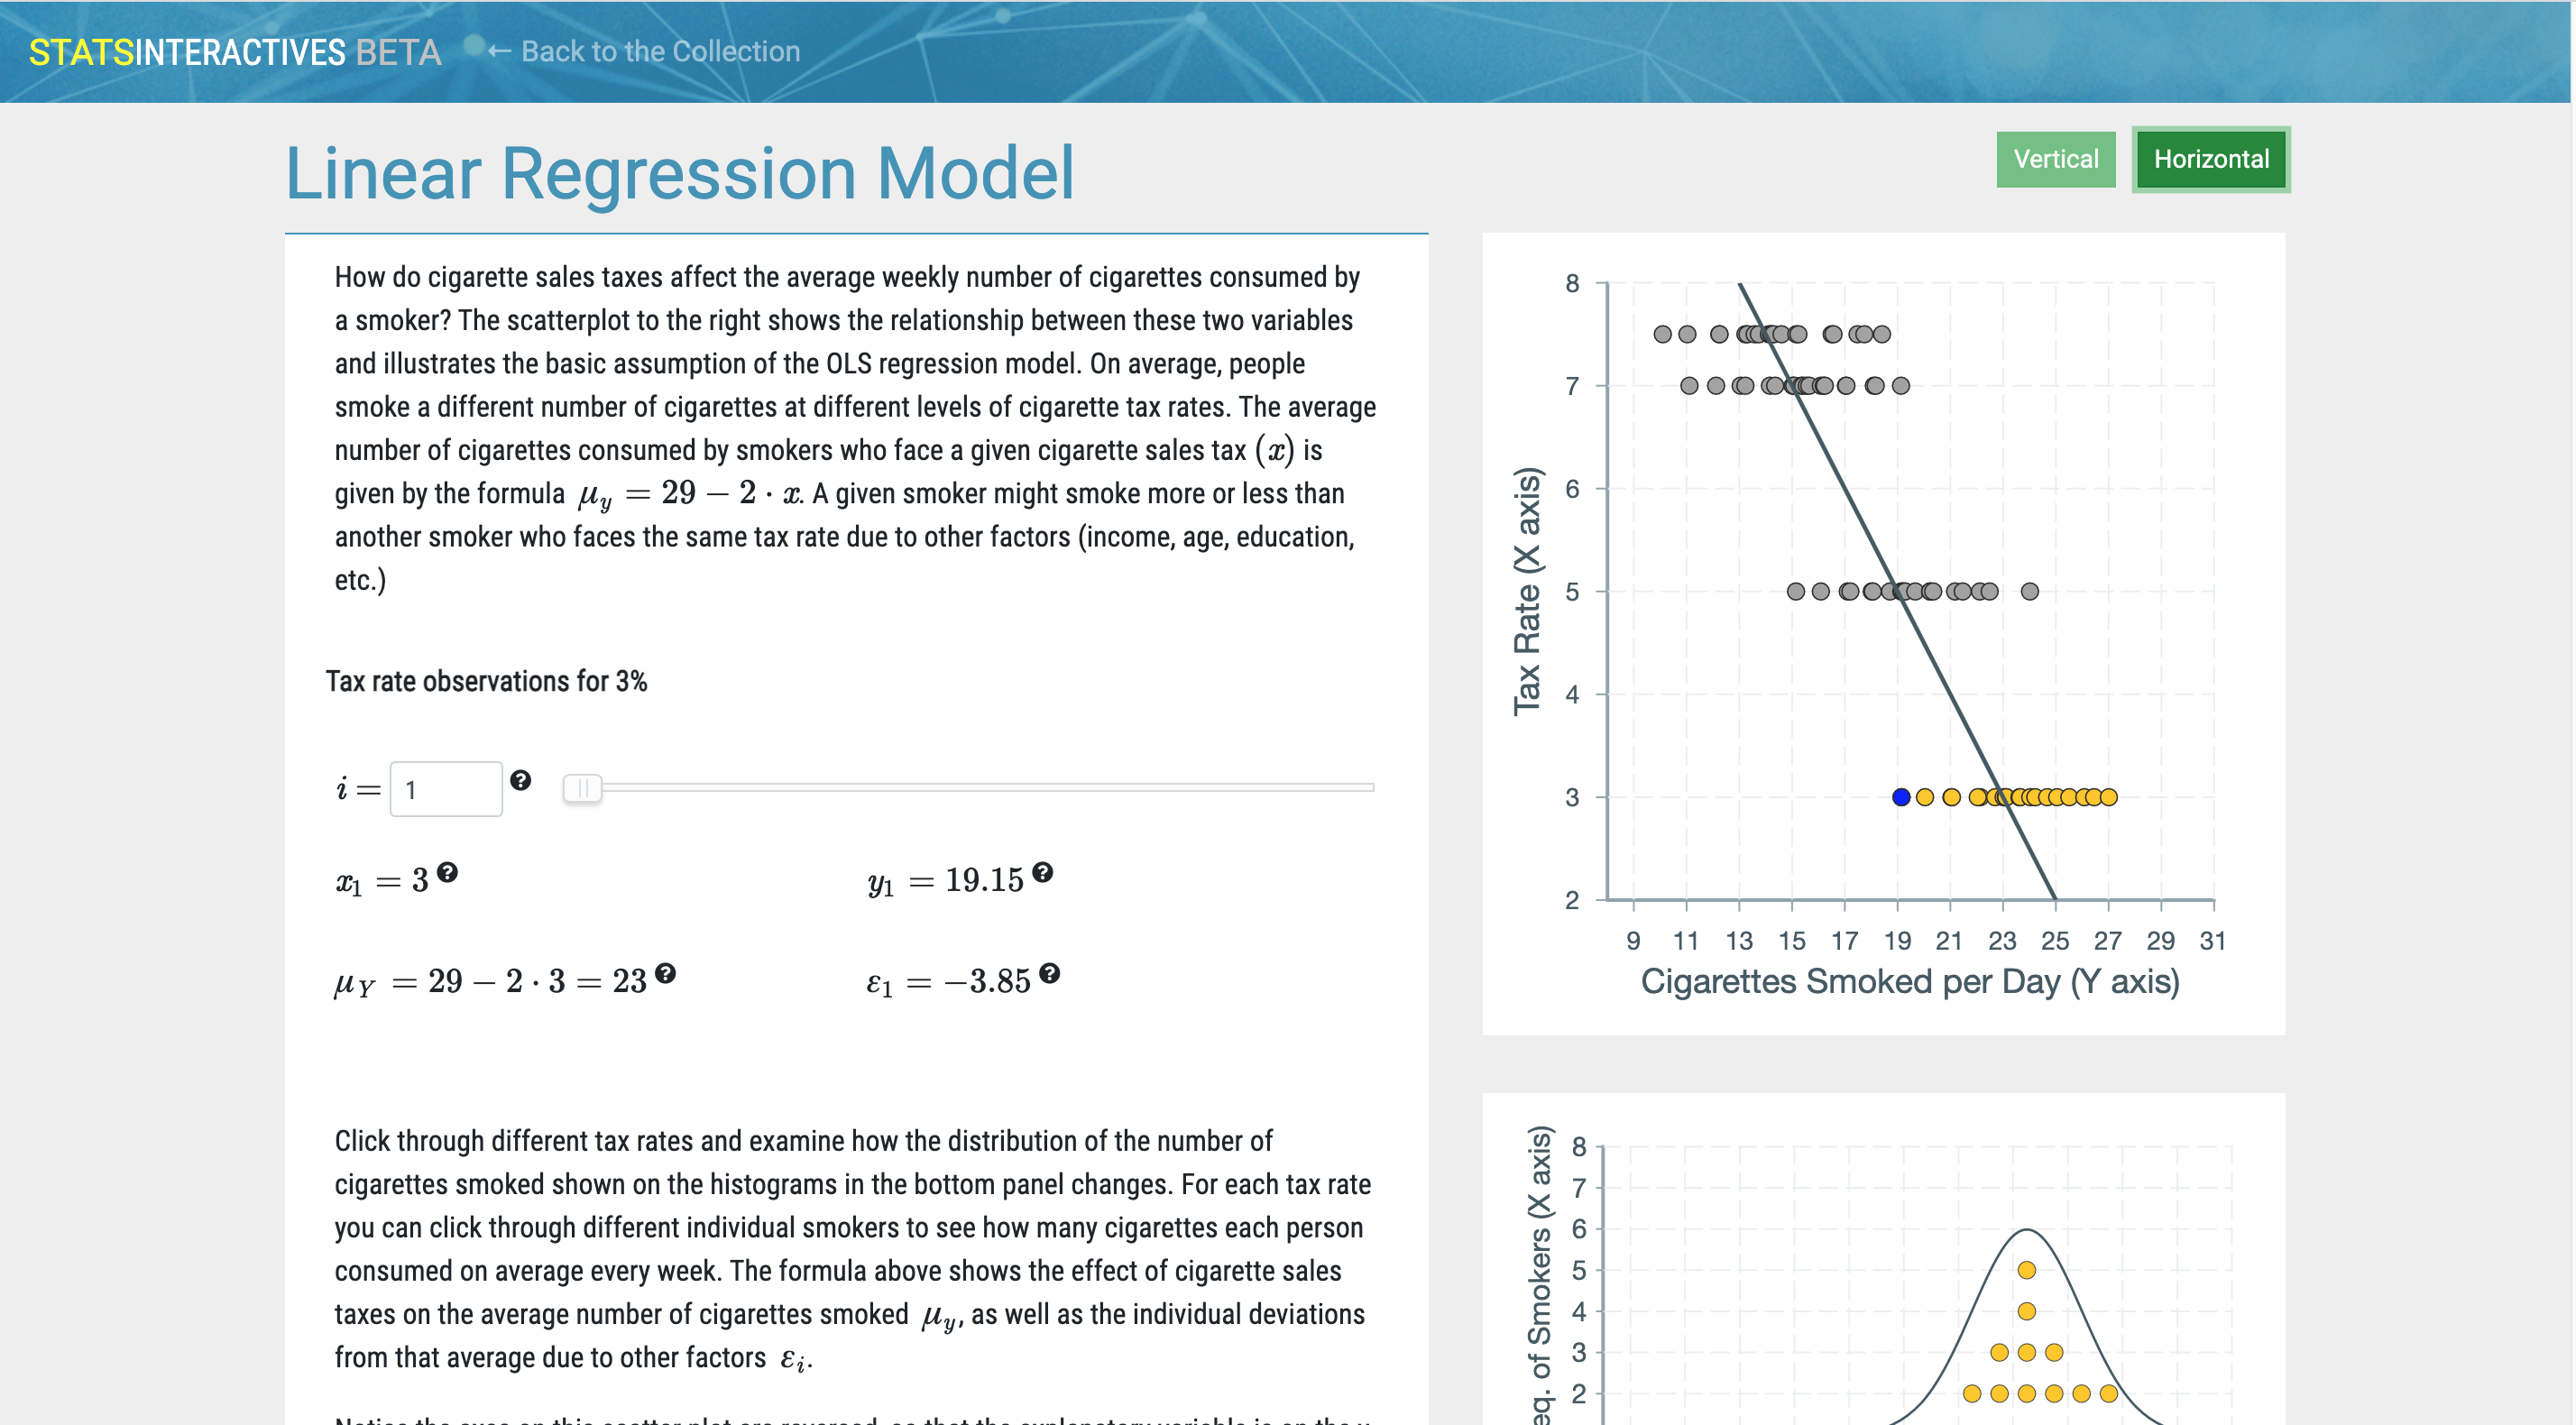 A simulation of the linear regression model.